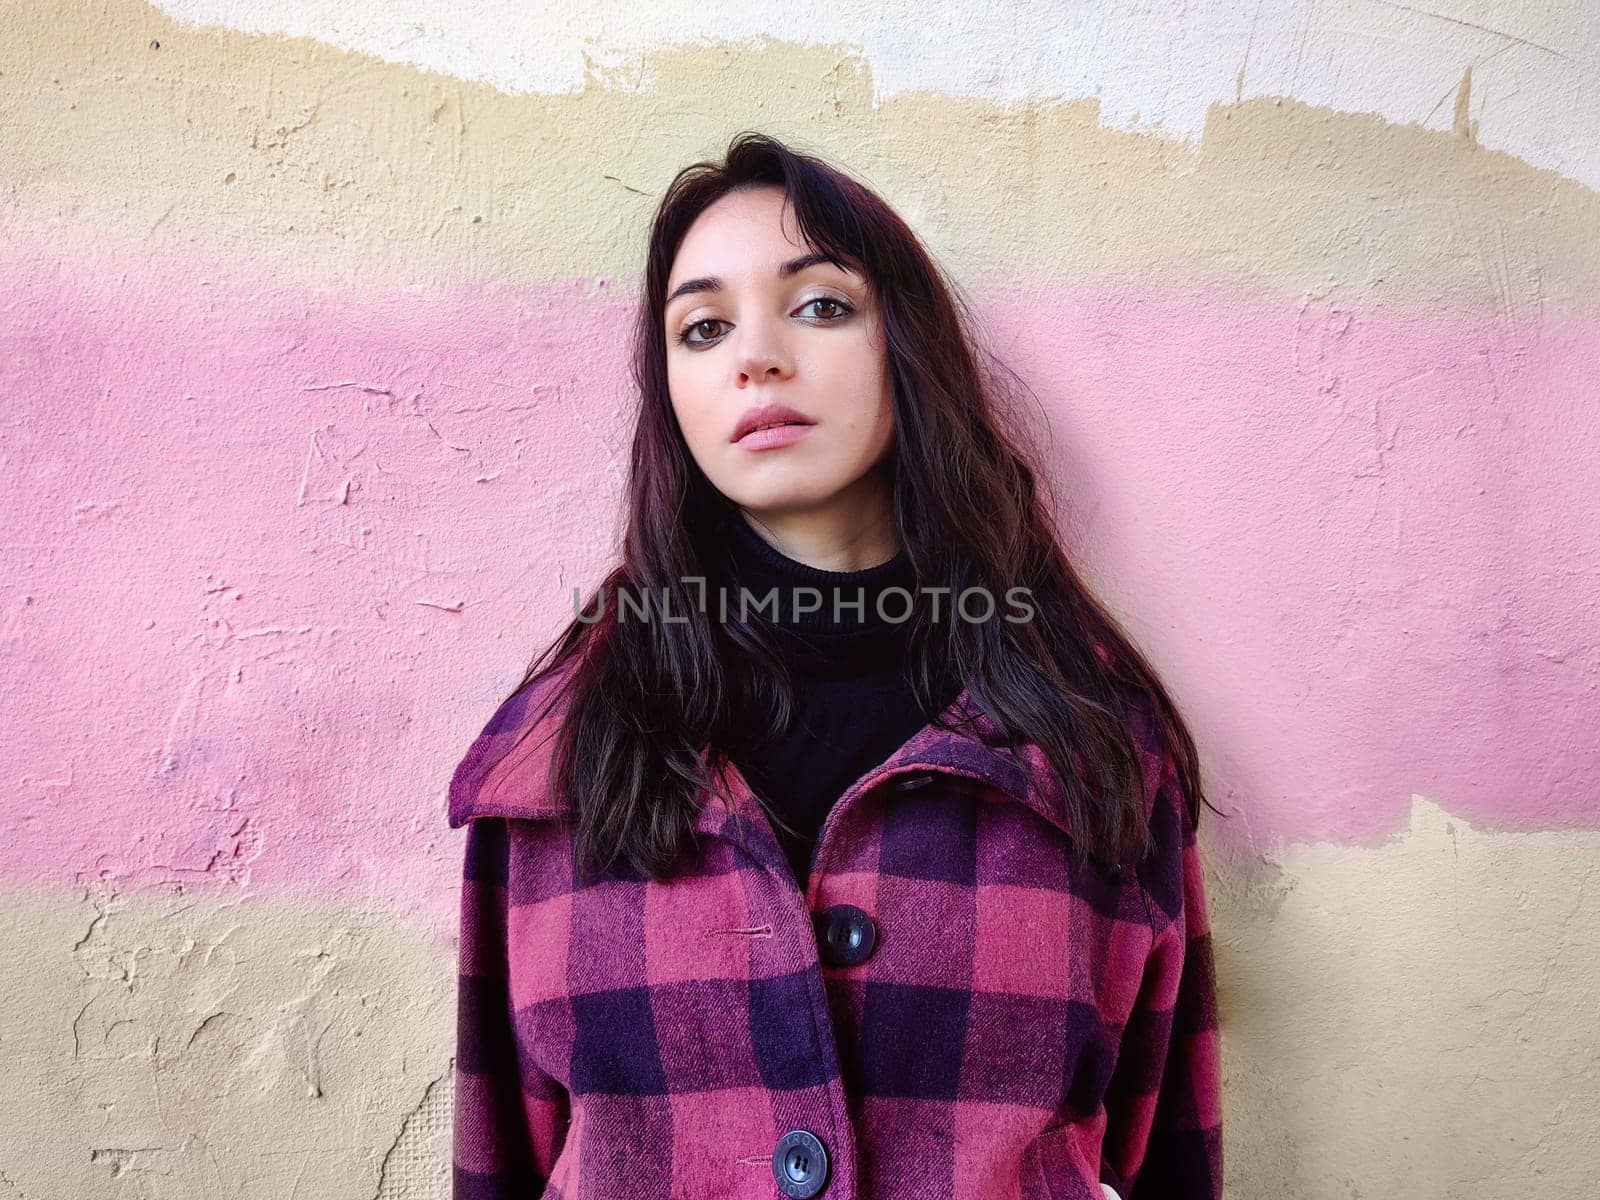 Thoughtful woman with dark hair, in black golf and in a purple plaid coat against the background of a colored wall. Thoughtful state.